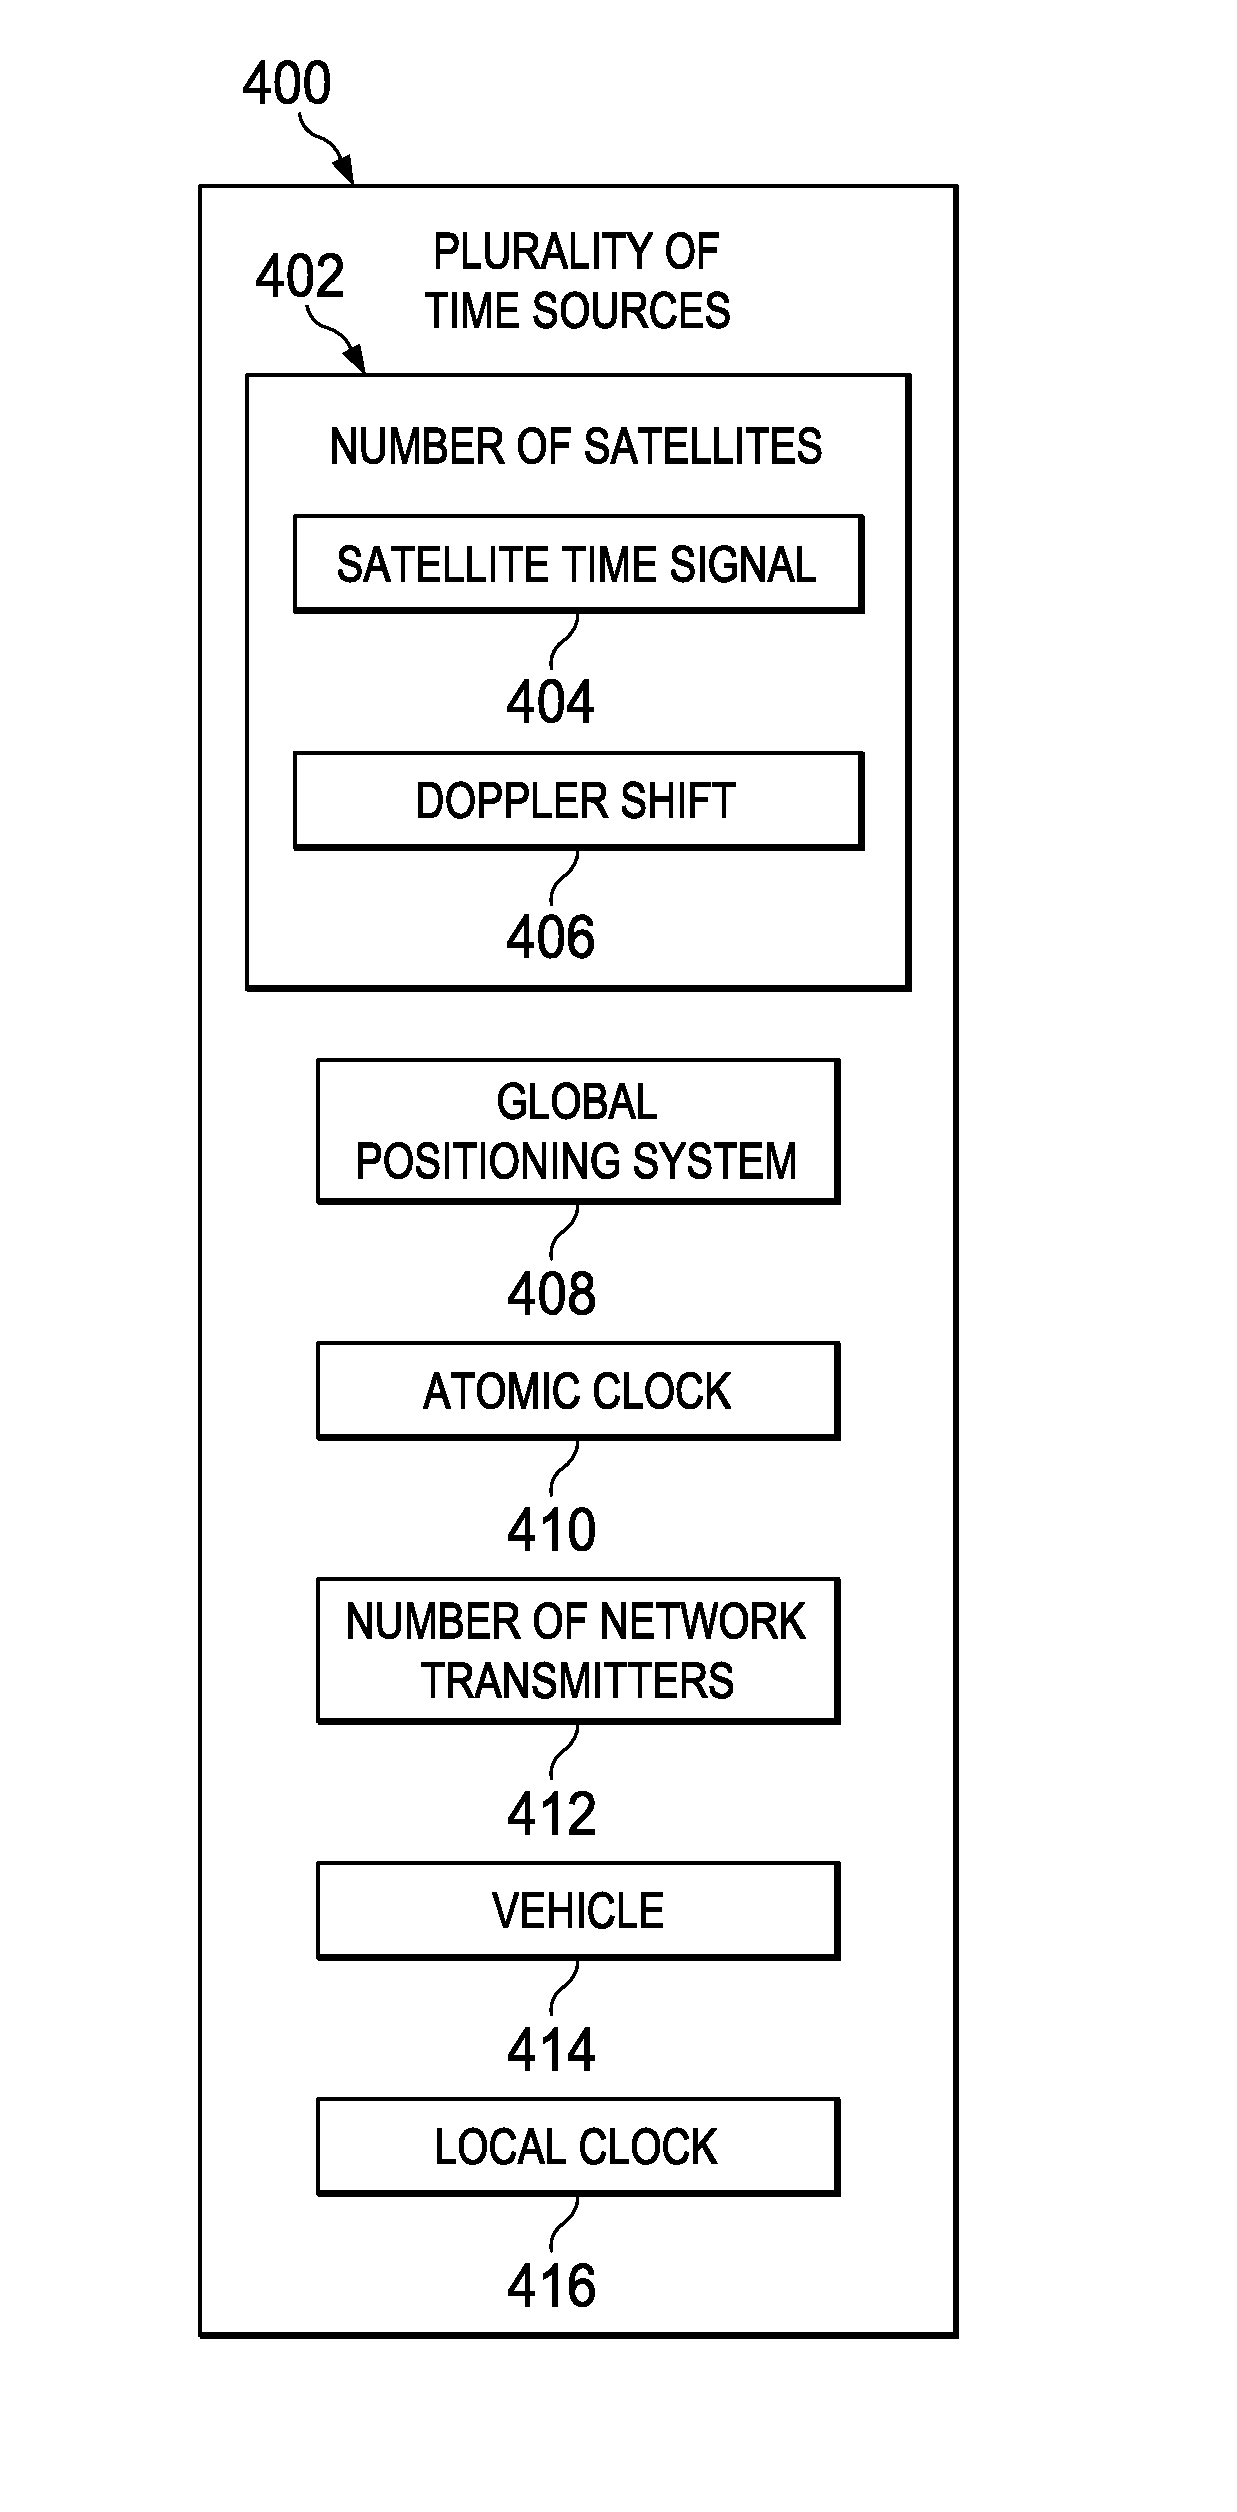 Information distribution system using quantum entanglement in a timed network delivery system